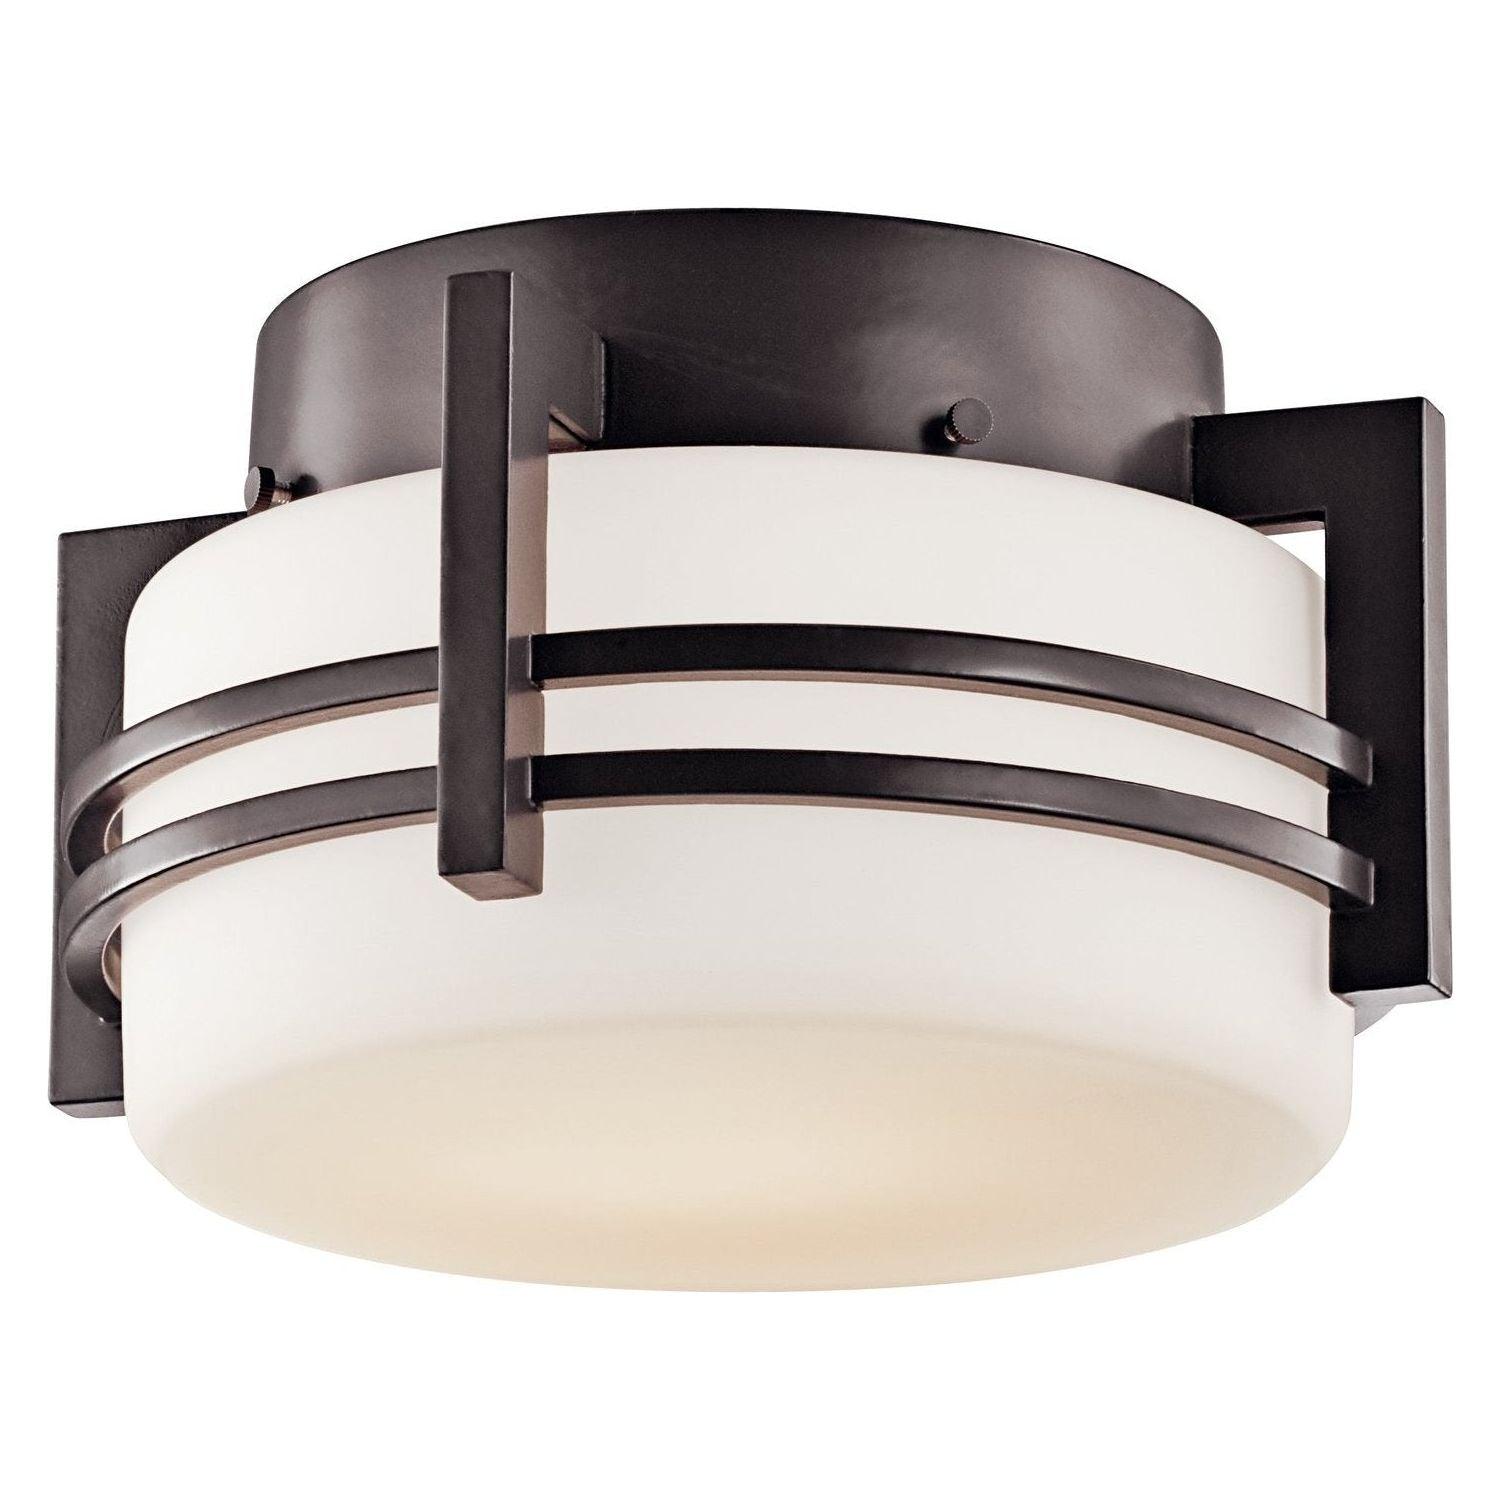 Kichler - Pacific Edge Outdoor Ceiling Light - Lights Canada